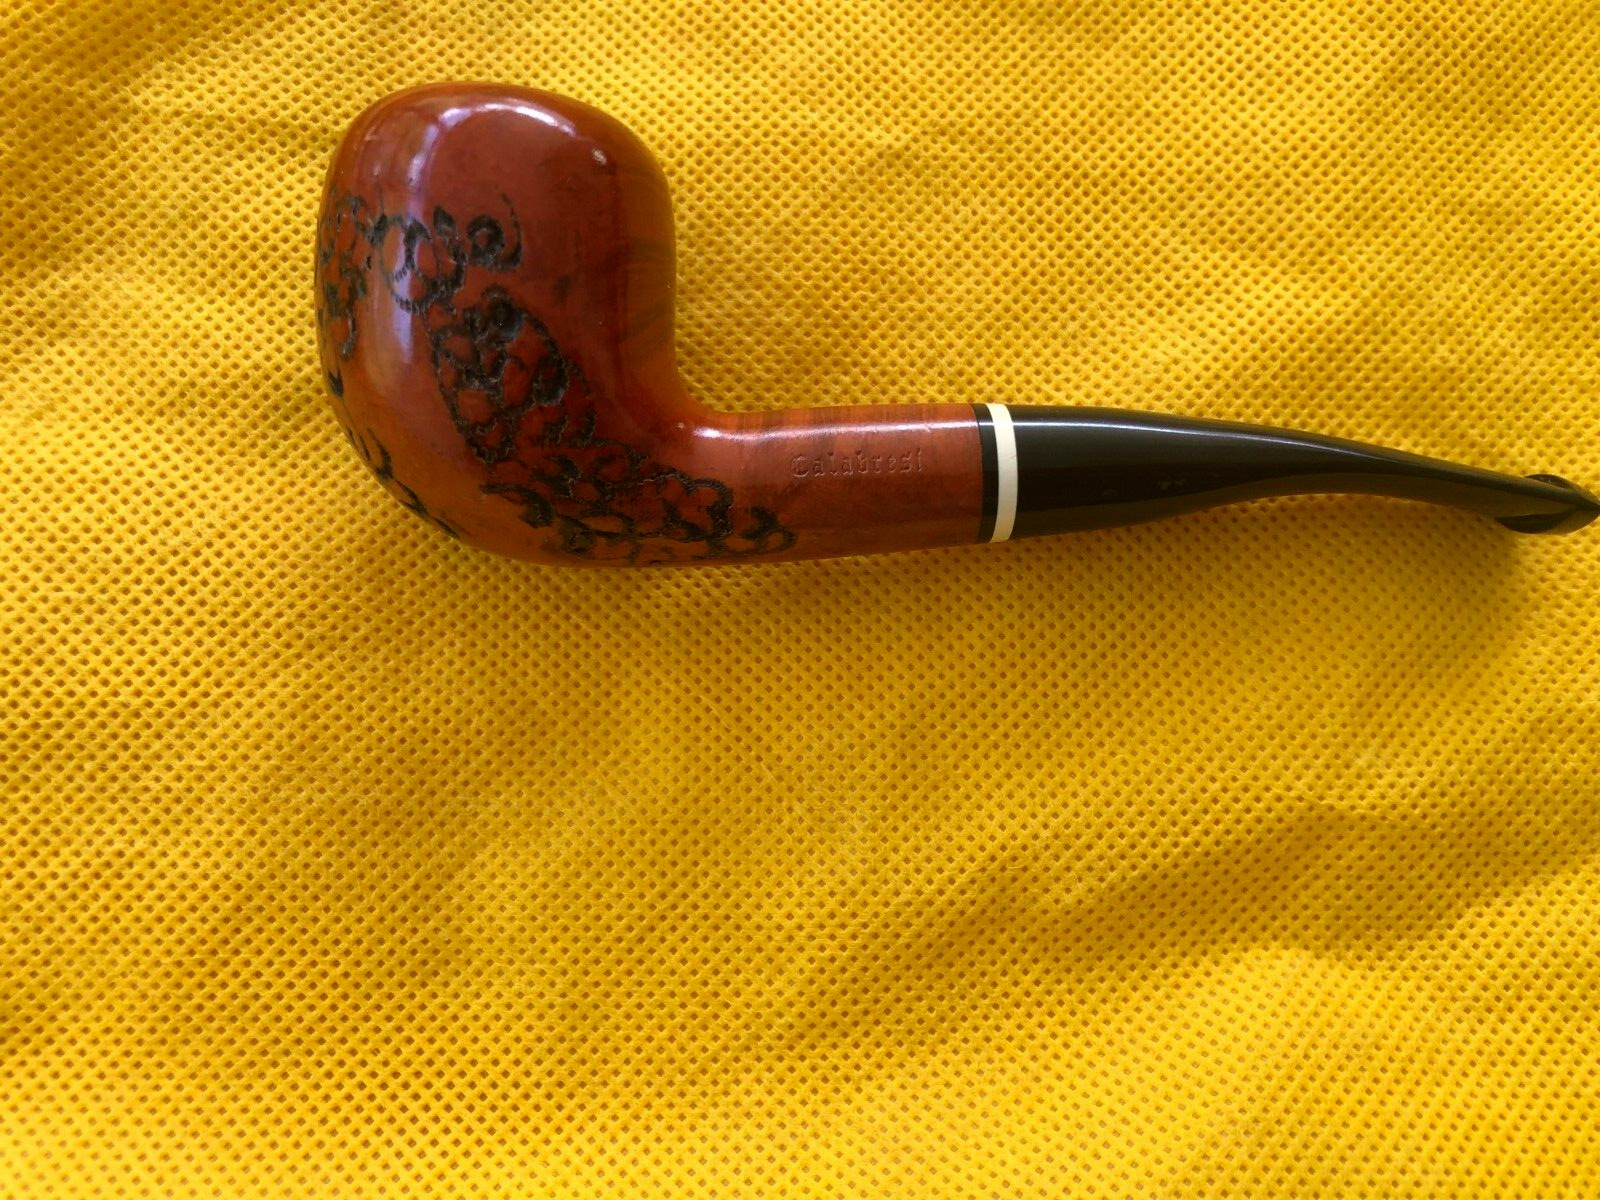 UNSMOKED THOMAS CHRISTIANO CALABRESI LARGE CANTED ACORN BRIAR PIPE